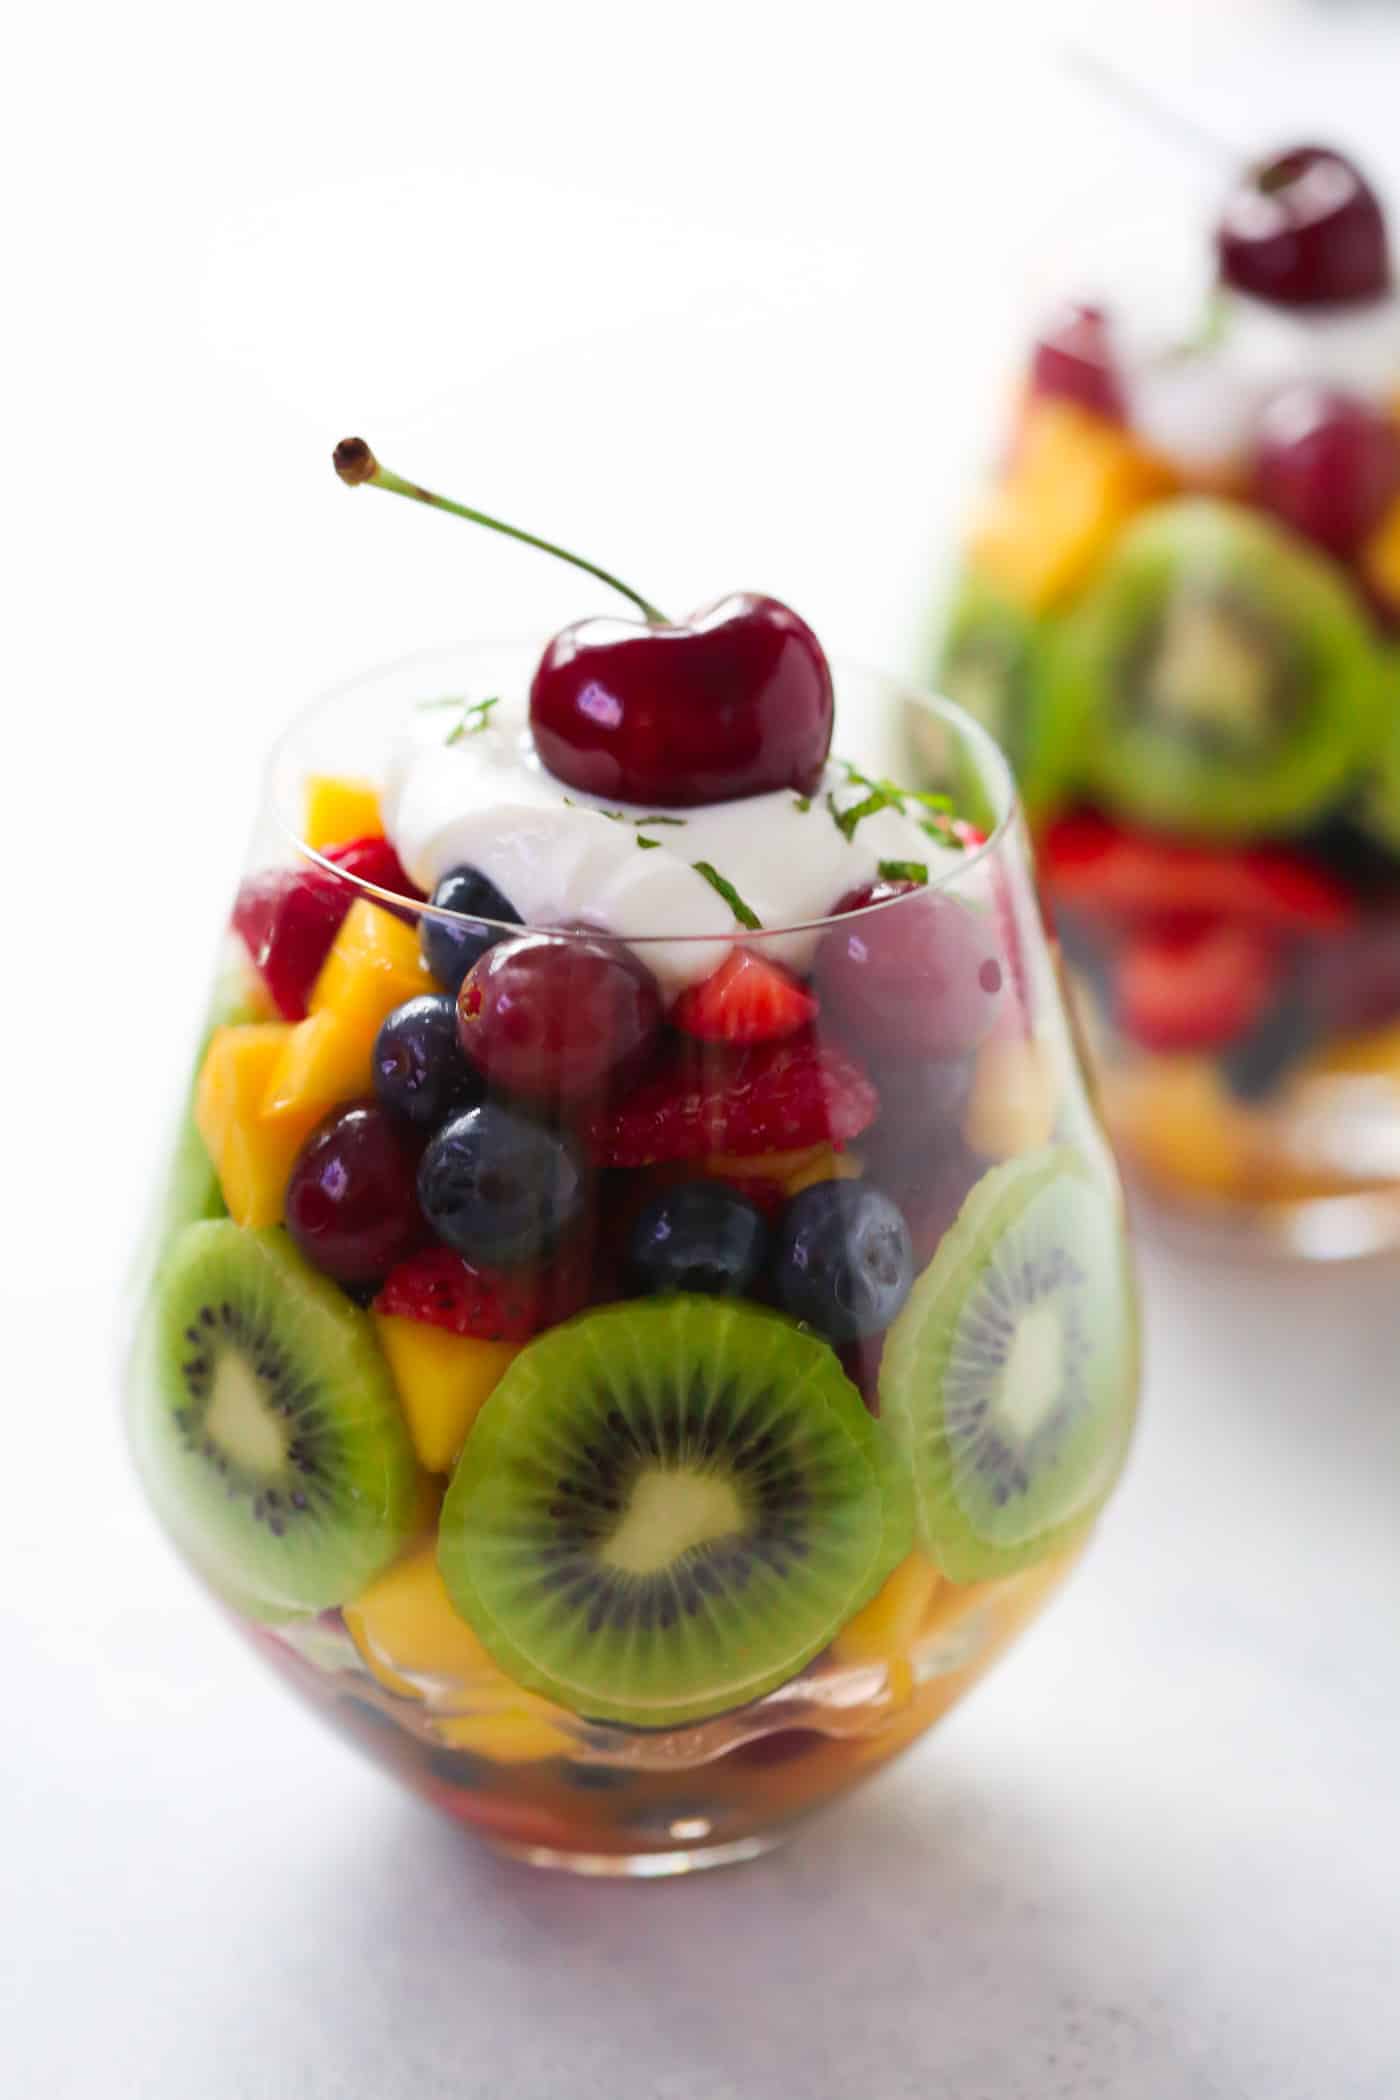 This Really Good Summer Fruit Salad is the perfect healthy and delicious summer treat or snack for you. It's made with blueberry, mango, kiwi, grapes and fresh orange juice. 